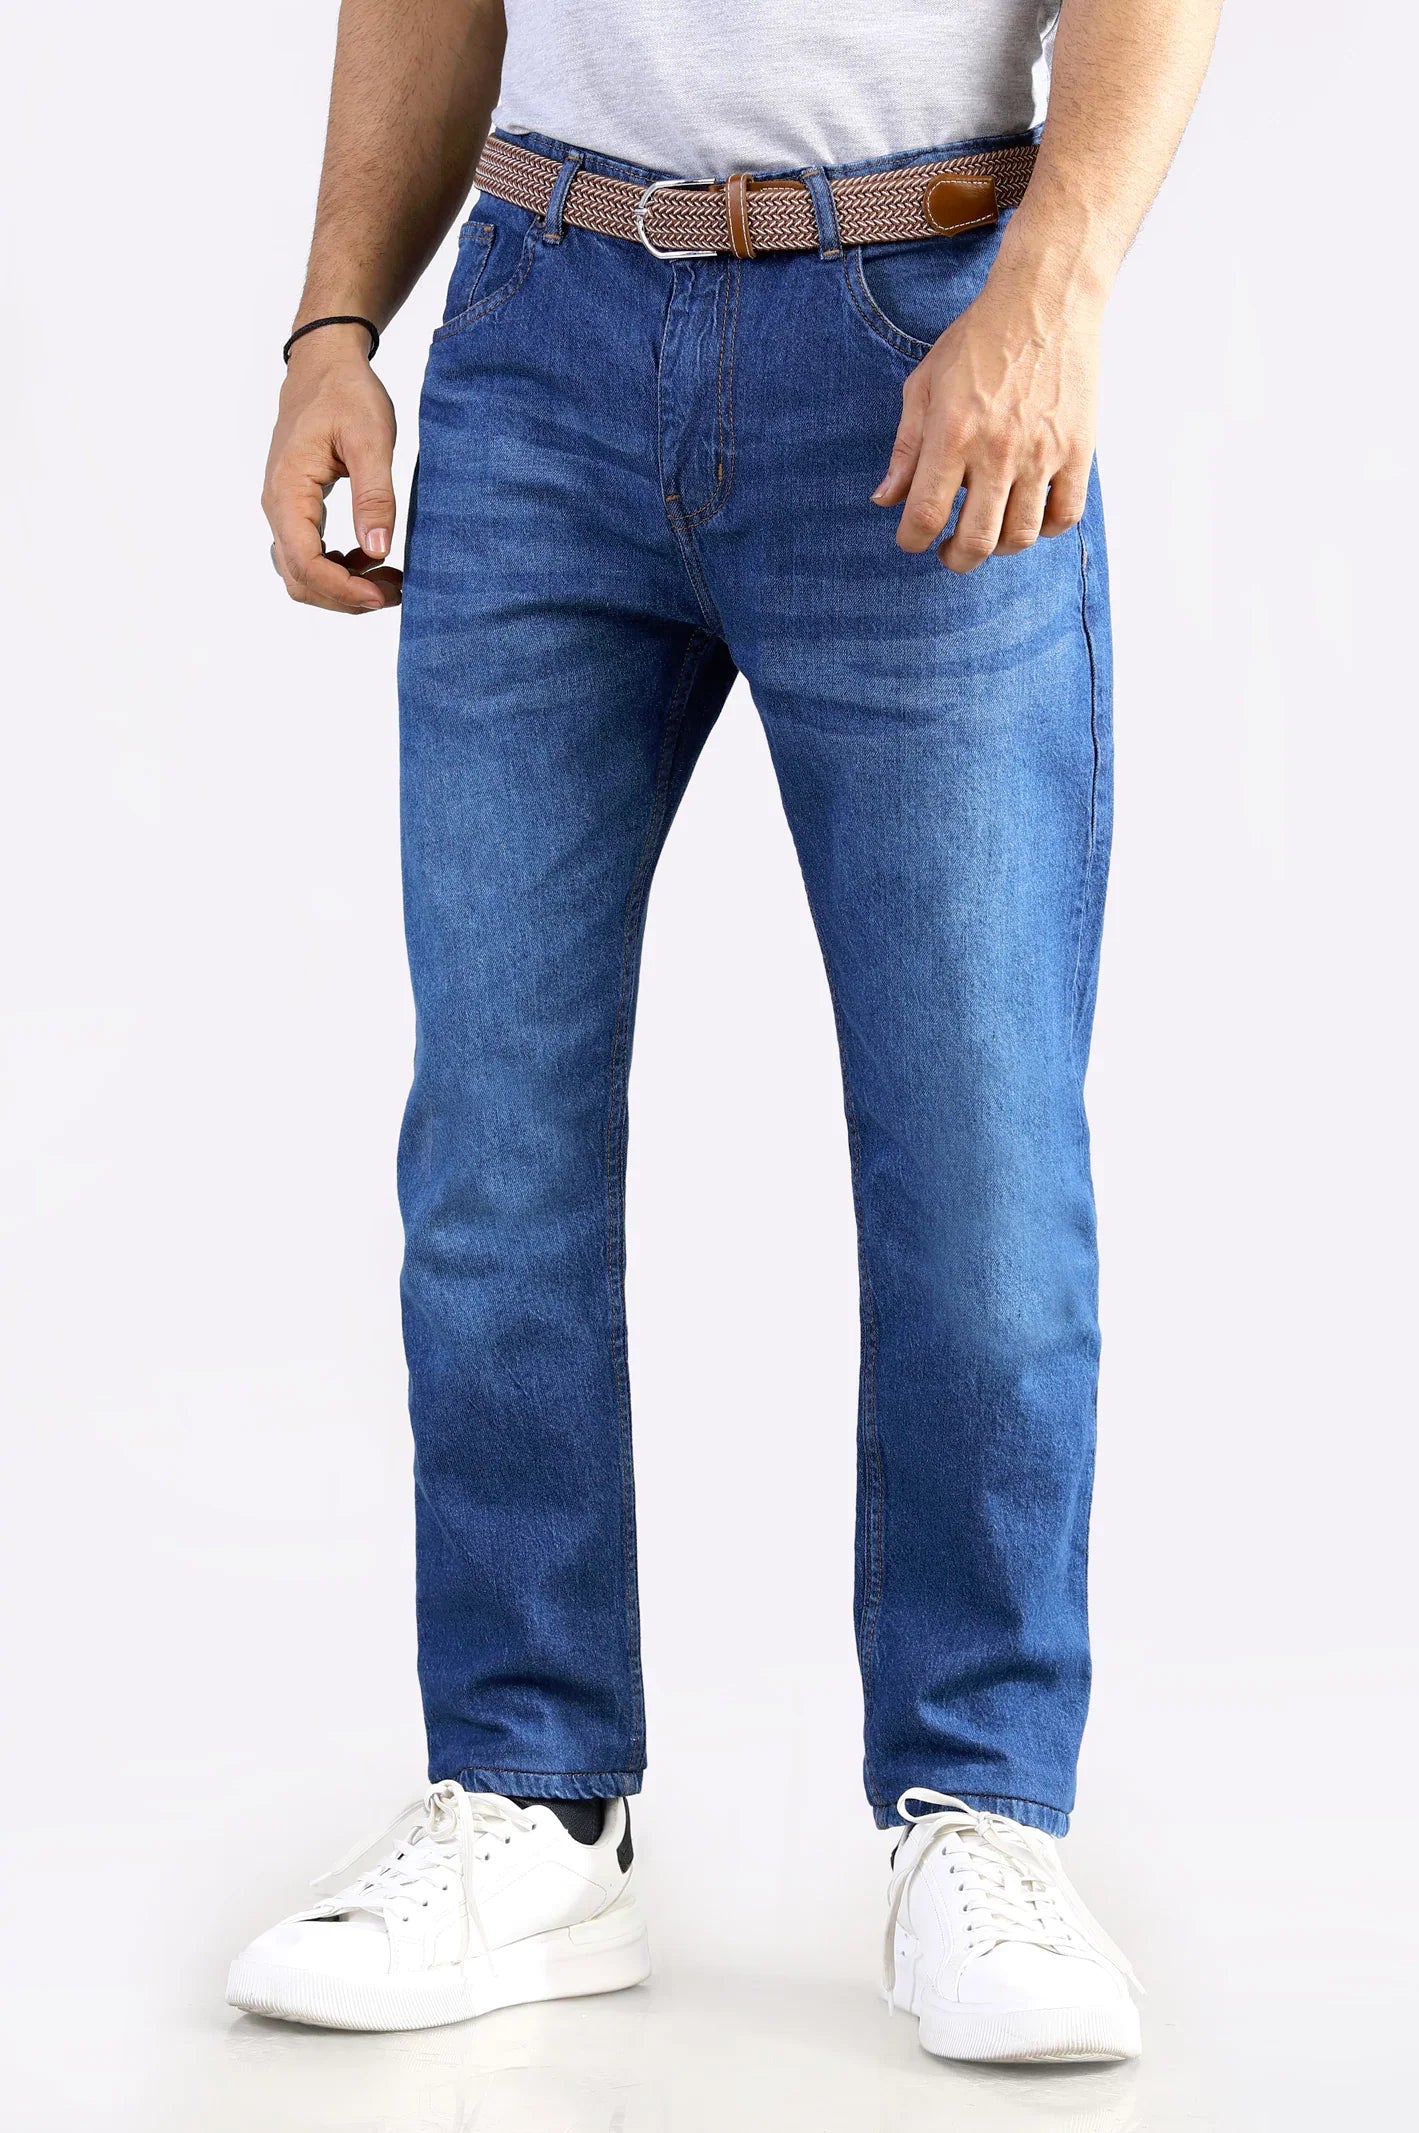 Medium Blue Smart Fit Jeans From Diners